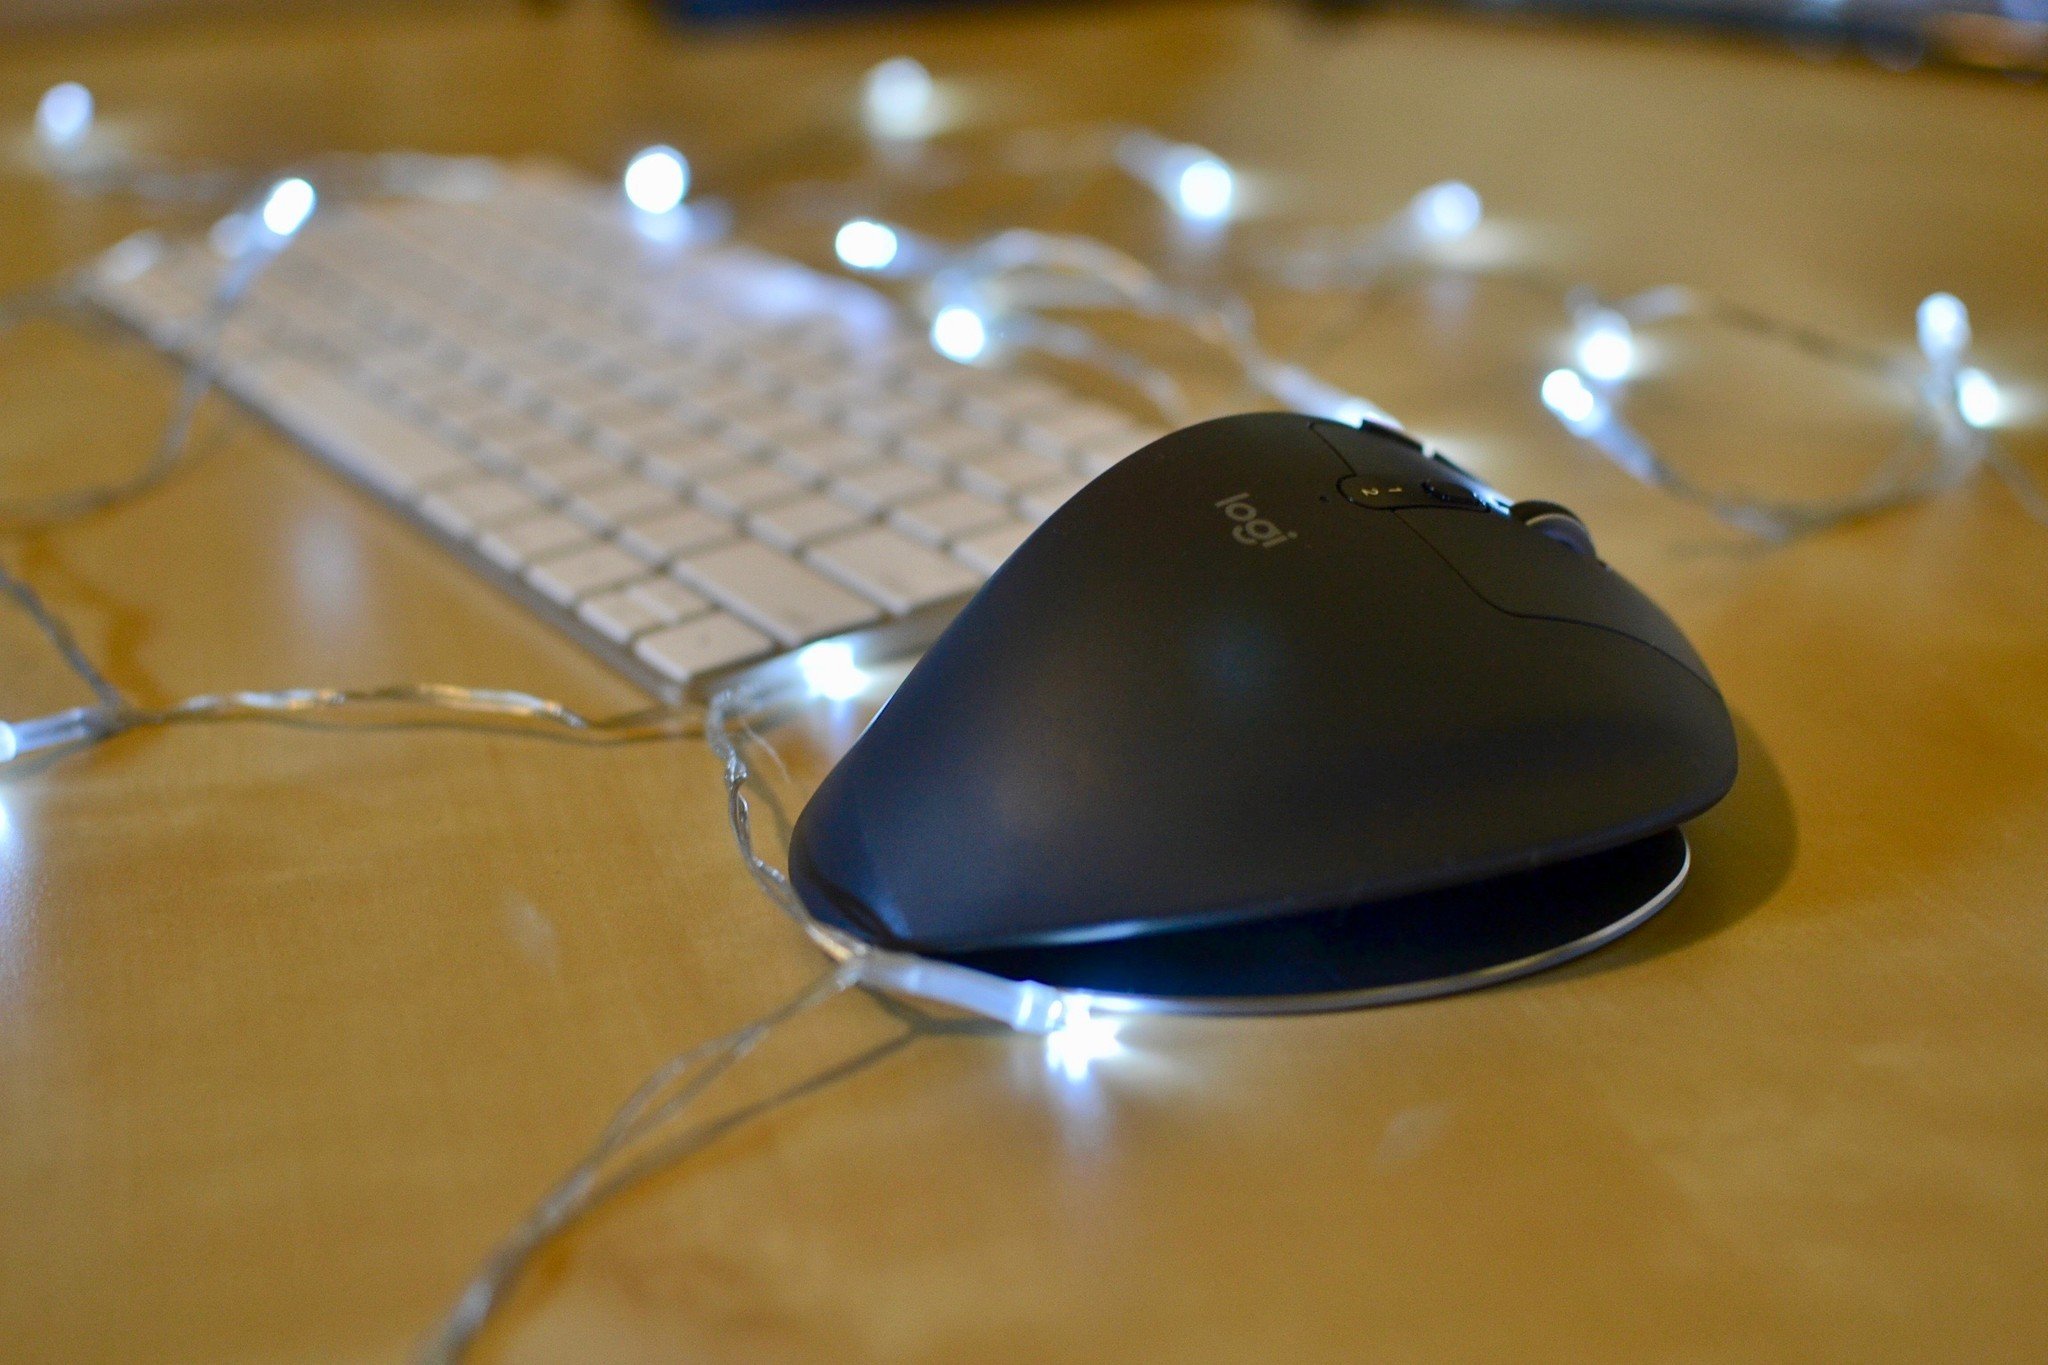 How to use a mouse or trackpad with your iPhone or iPad